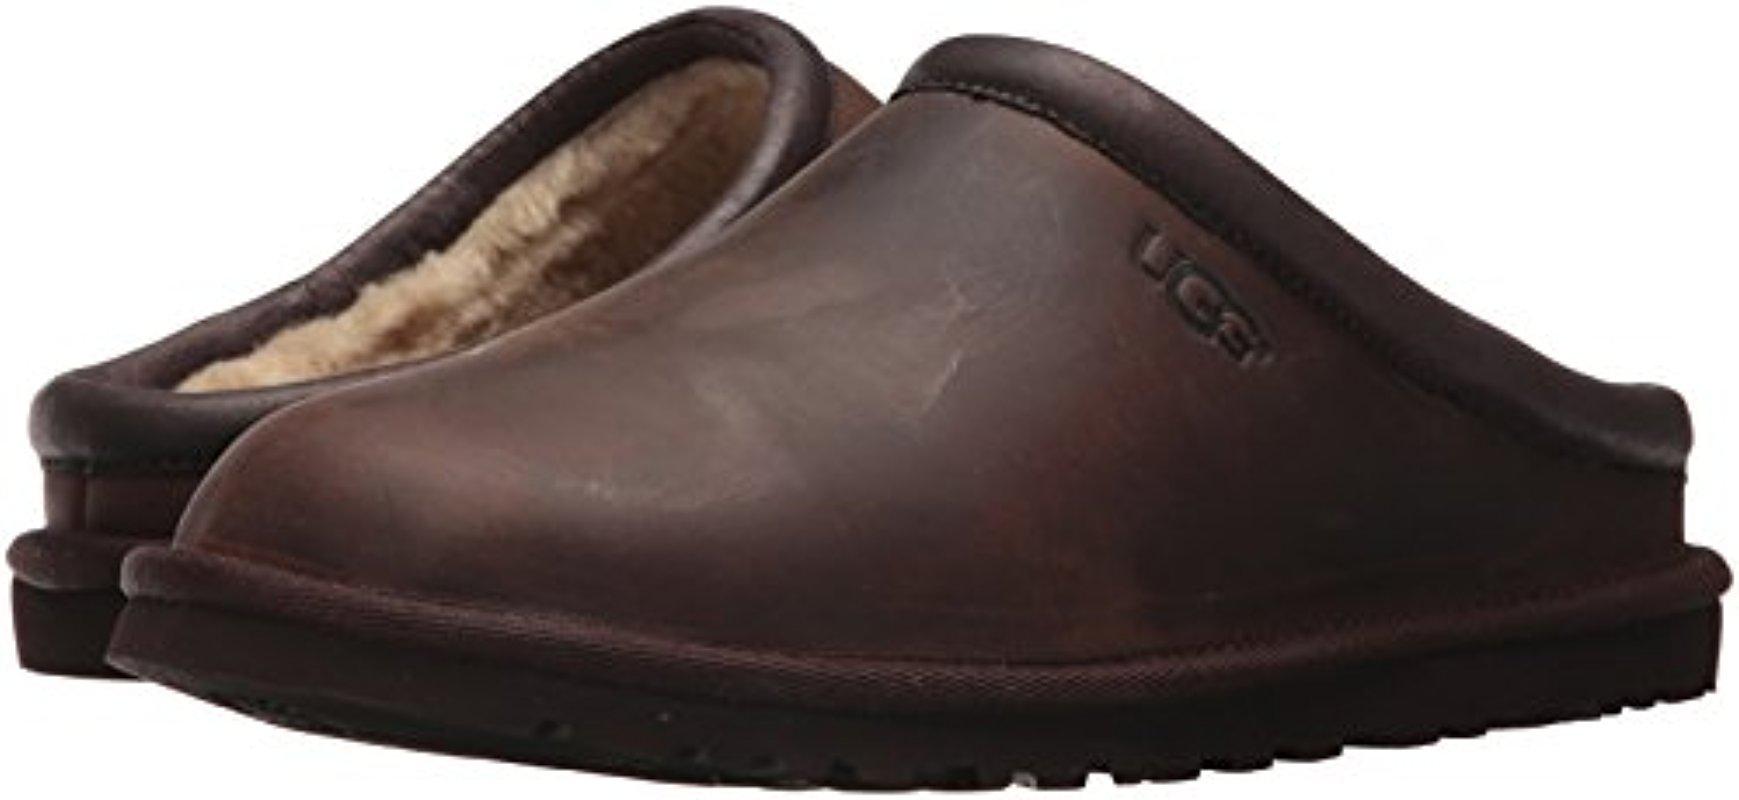 classic uggpure faux shearling lined clog